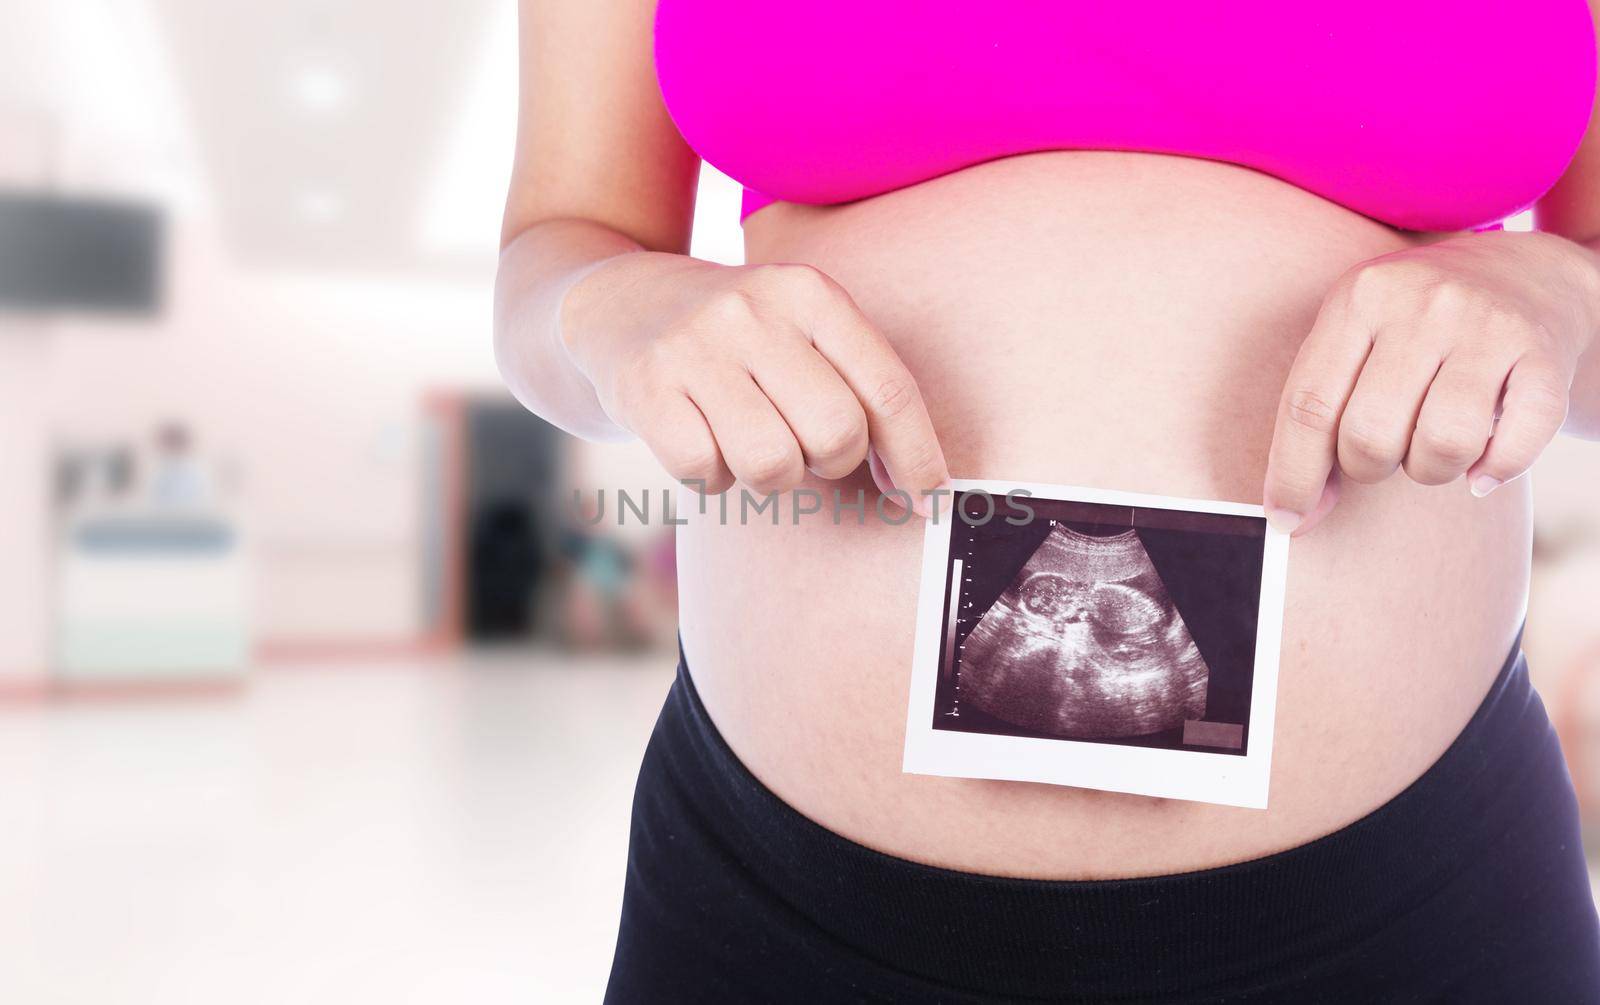 Pregnant woman hands holding ultrasound photo in hospital background by geargodz